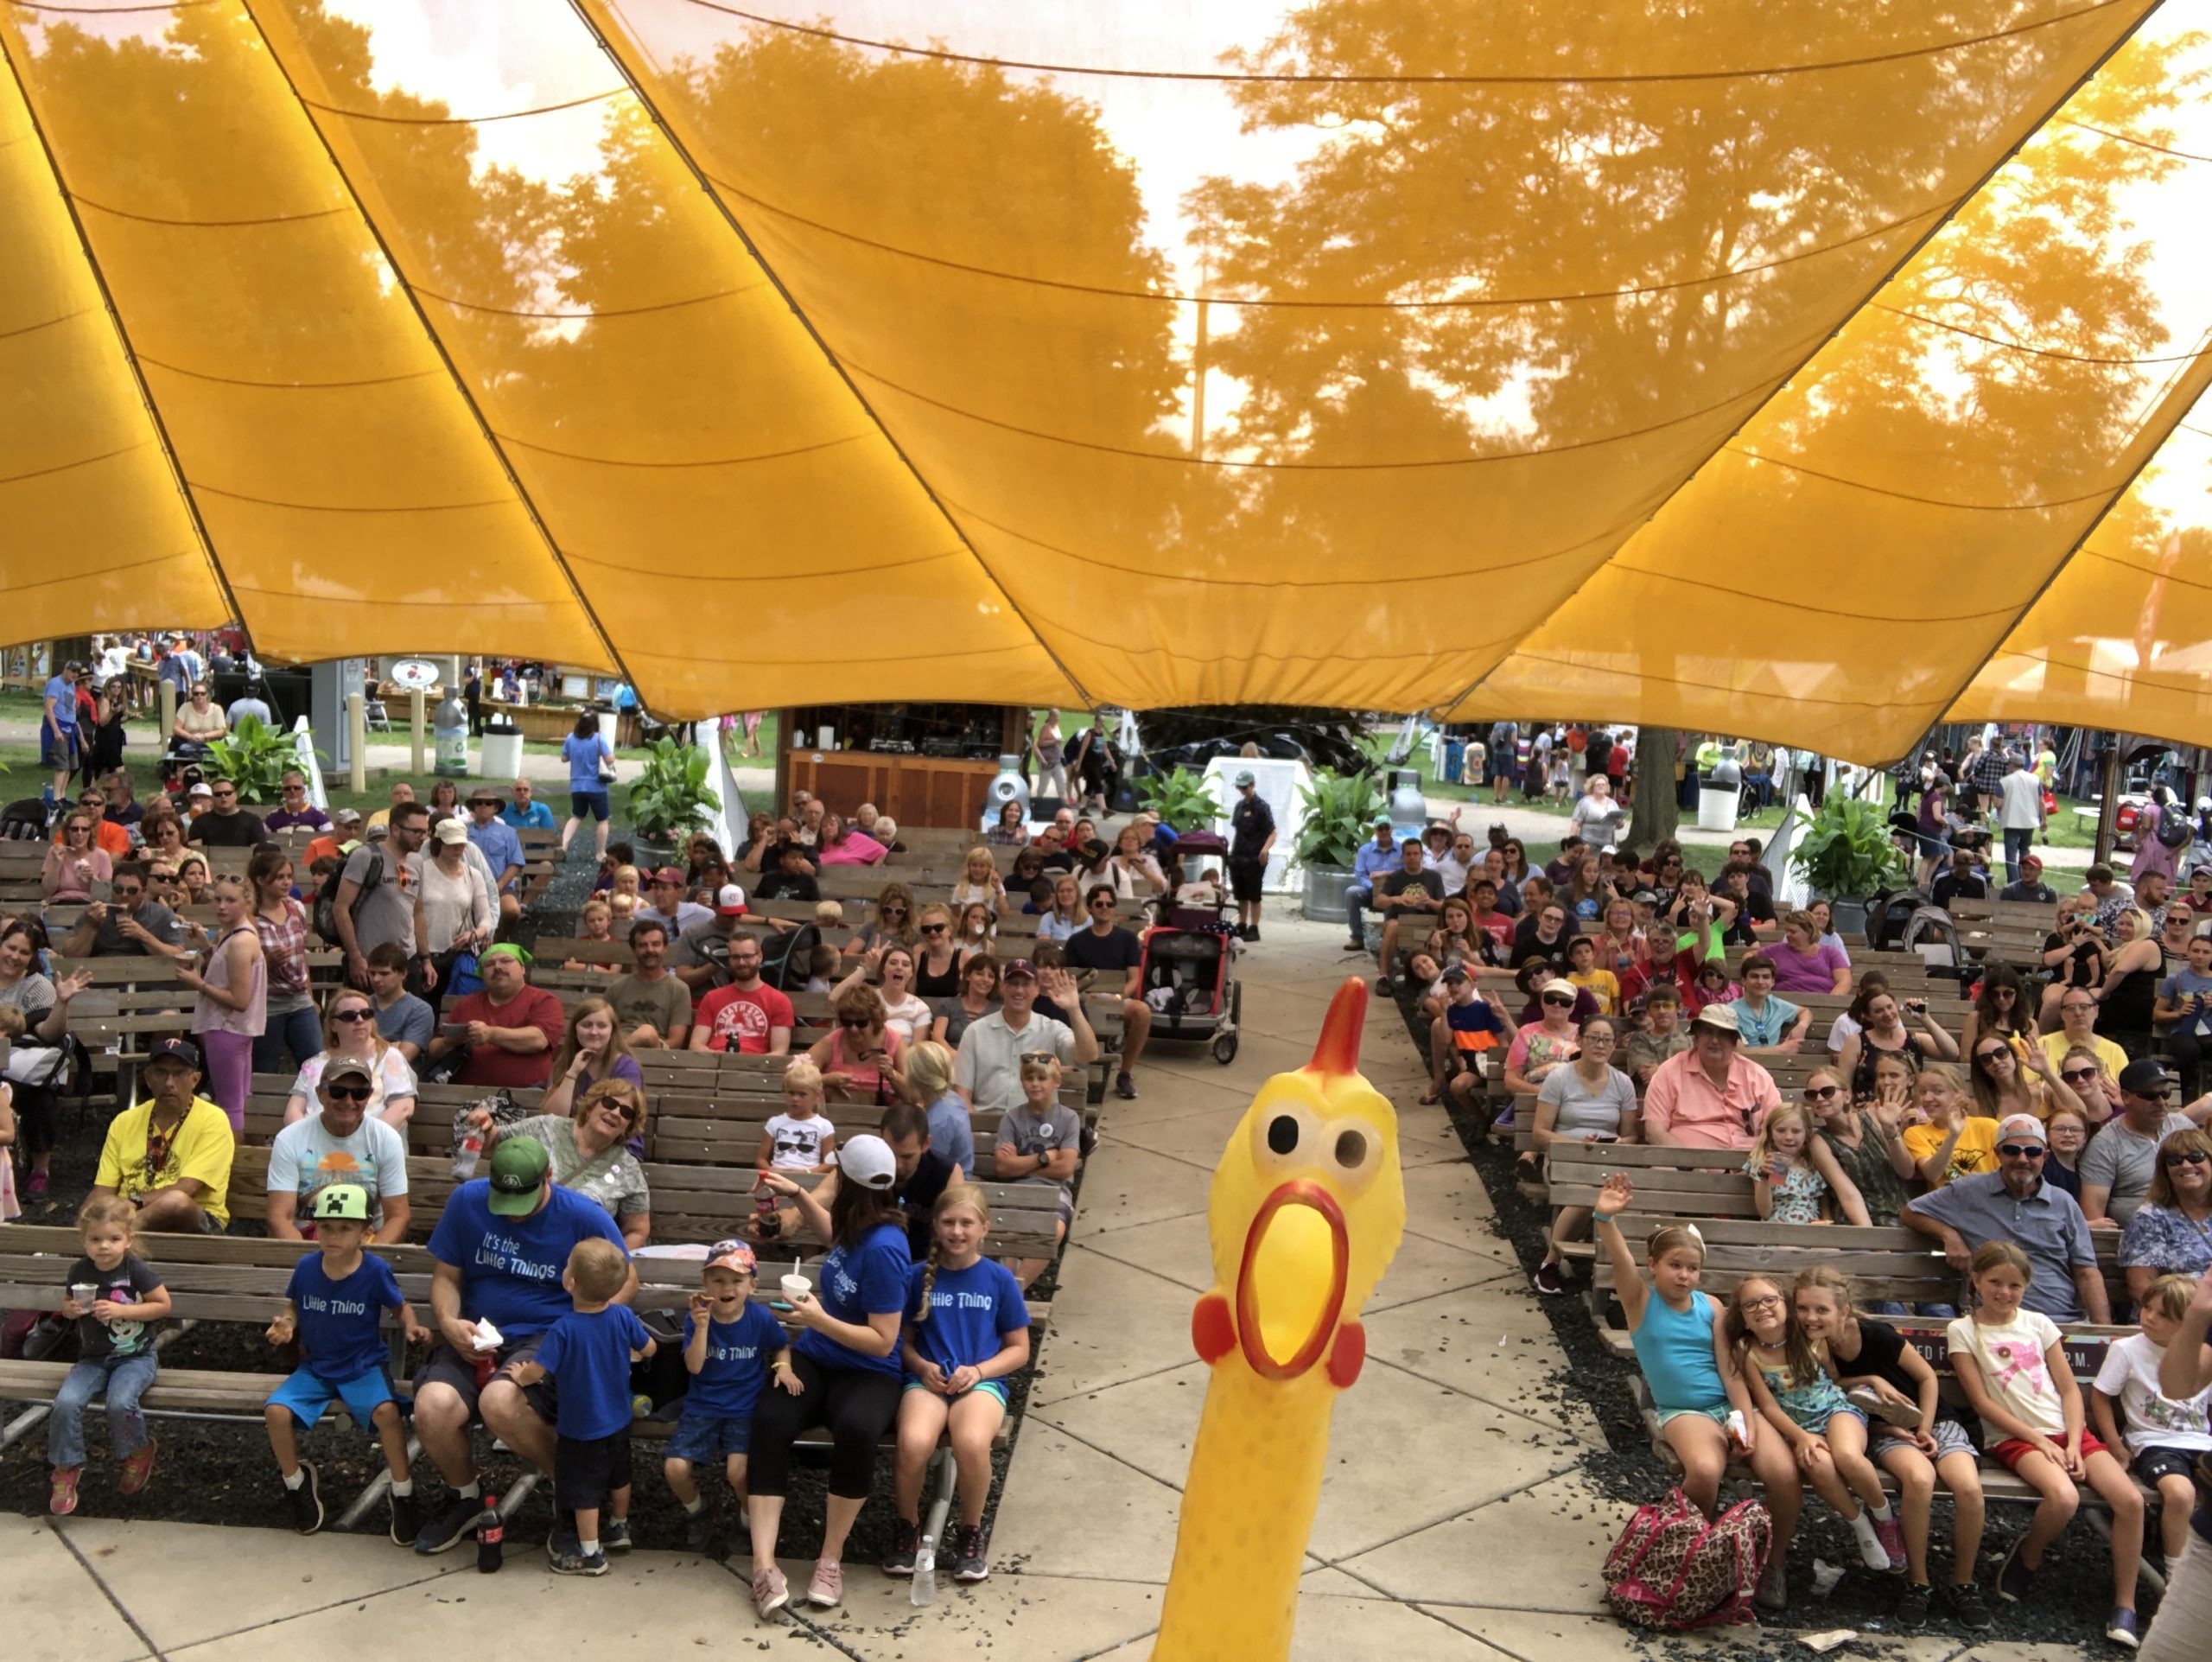 Rubber chicken picture at Minnesota Fair